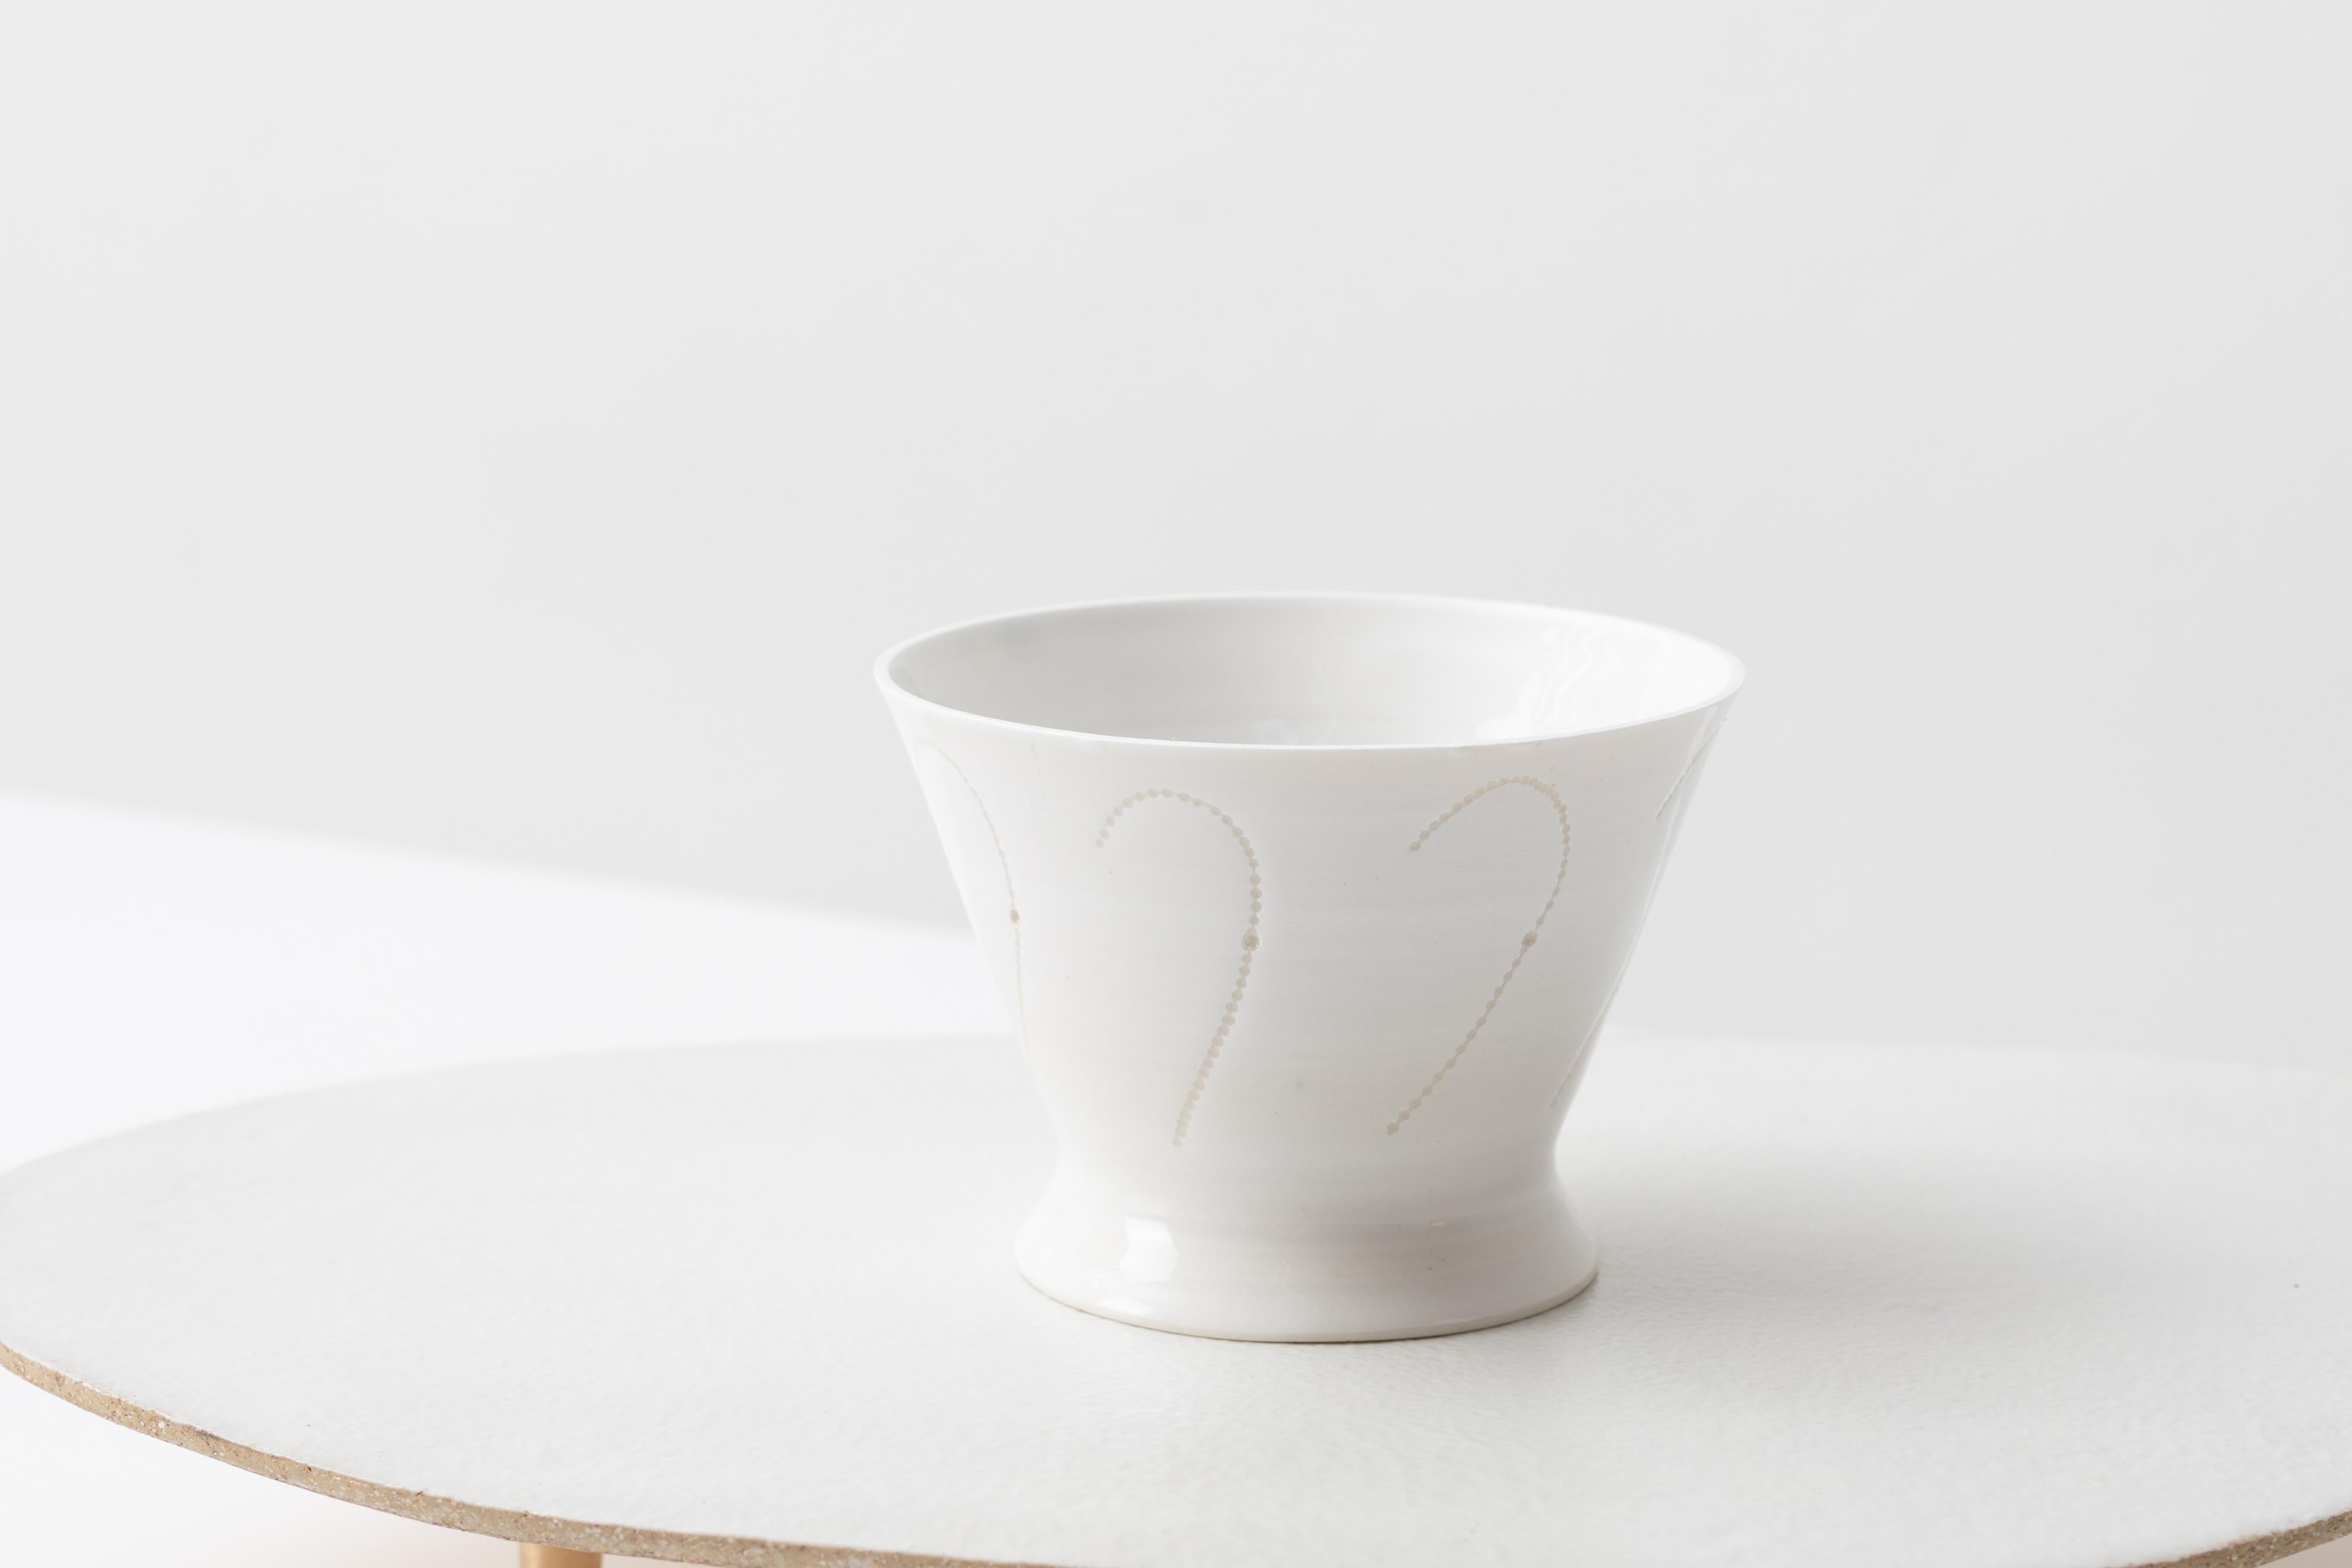 A thrown porcelain vessel on a glazed and gilded ceramic plinth by artist Christopher Riggio